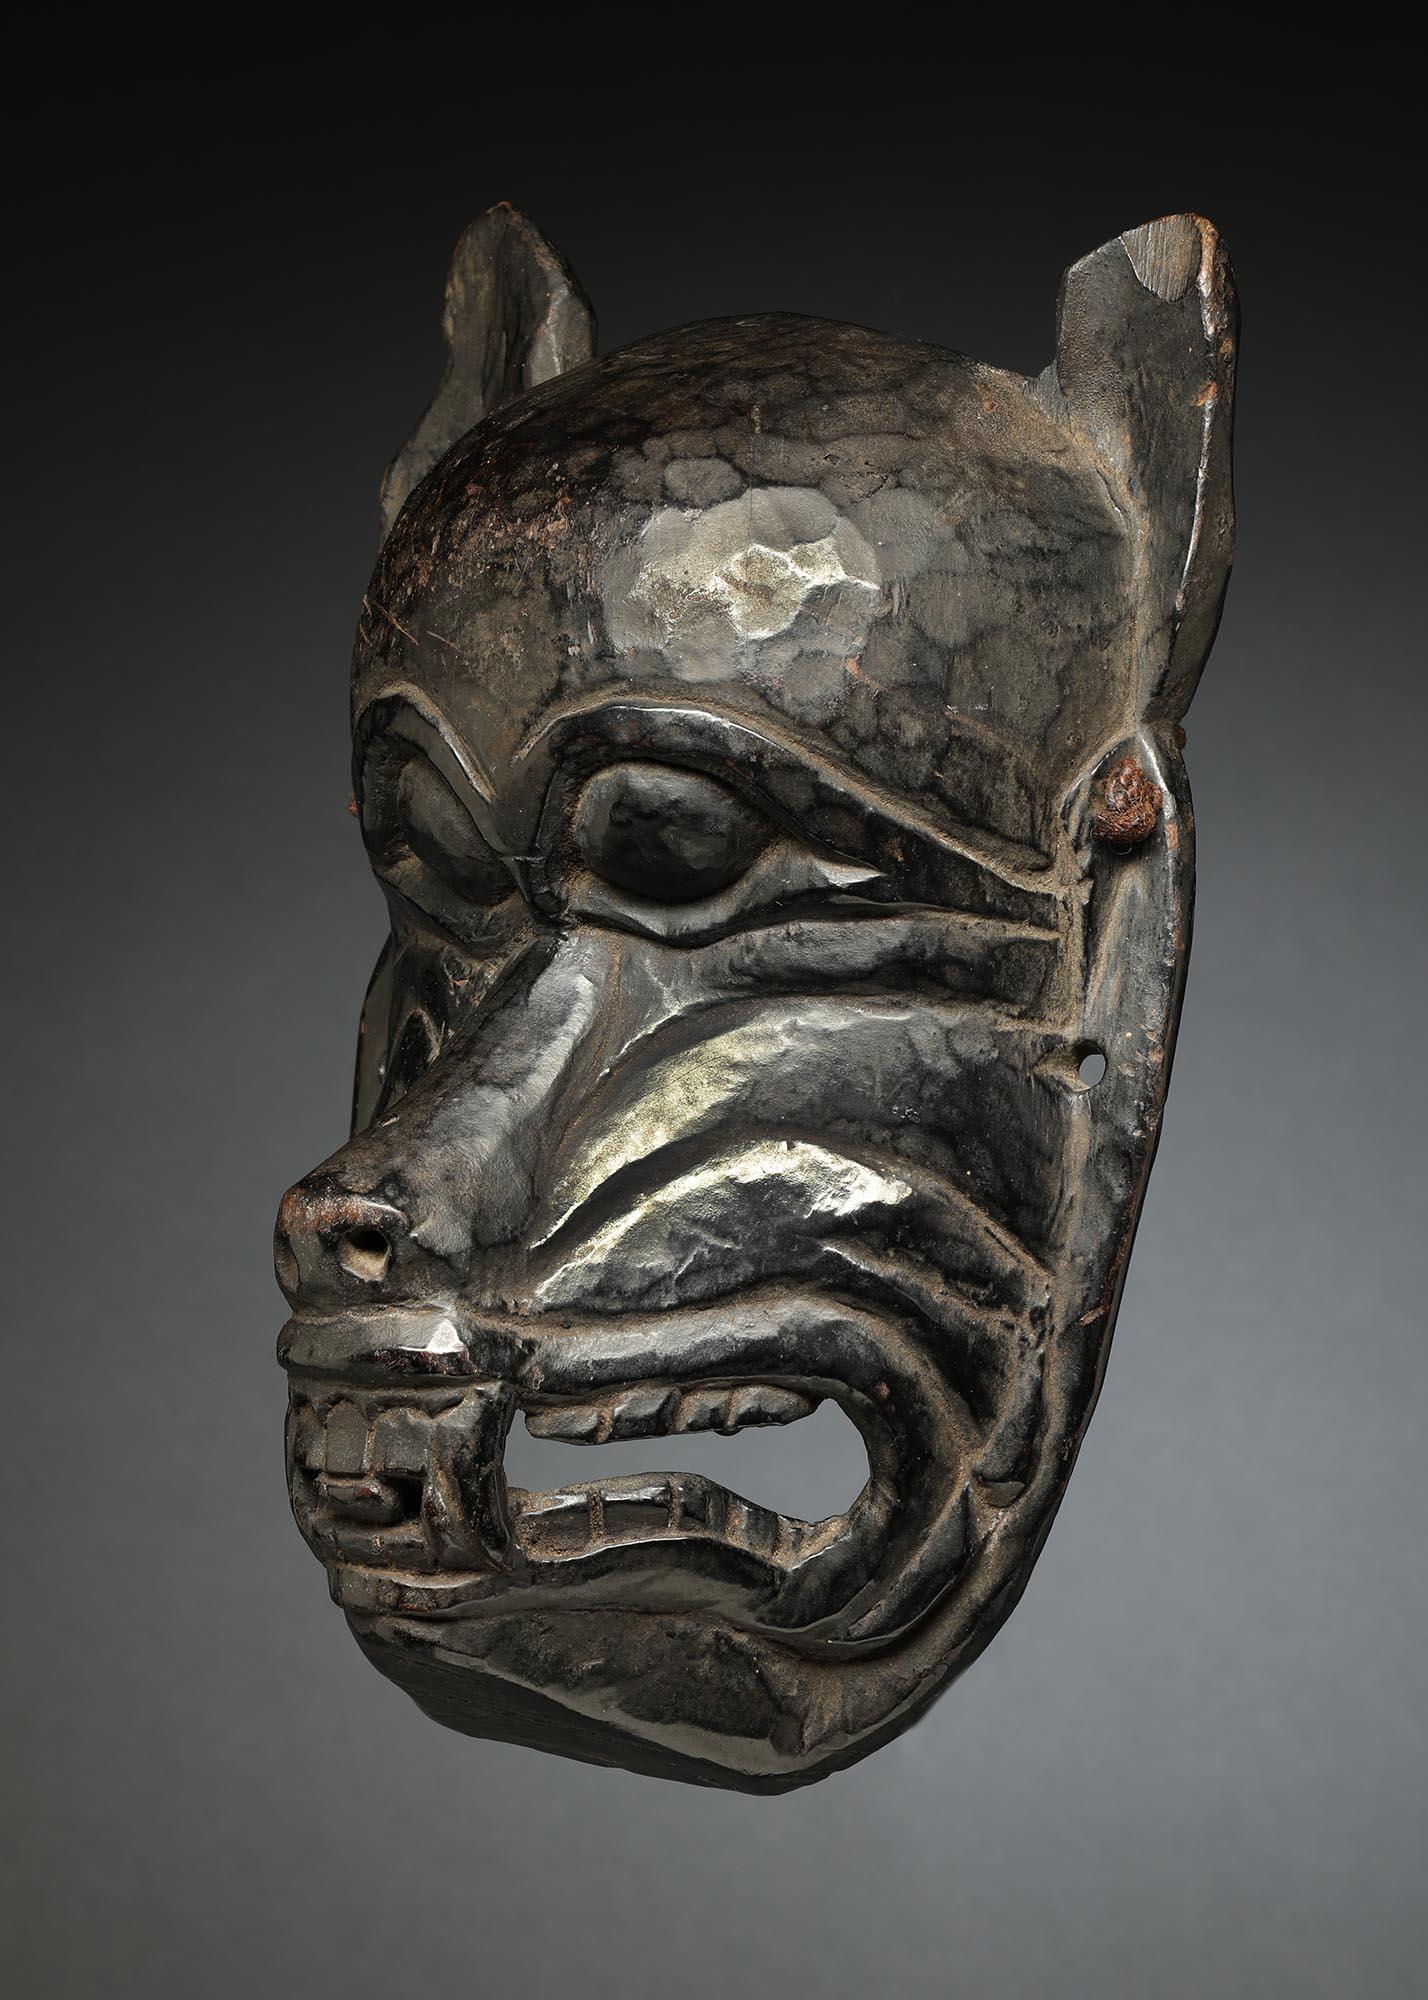 Wolf or similar animal mask from Nepal with alert ears, mouth with teeth and fangs. Deep old patina on front and inside from traditional use. Ex- private collection in Southwest, ex private collection, Colorado 1980's. Mask 10 1/2